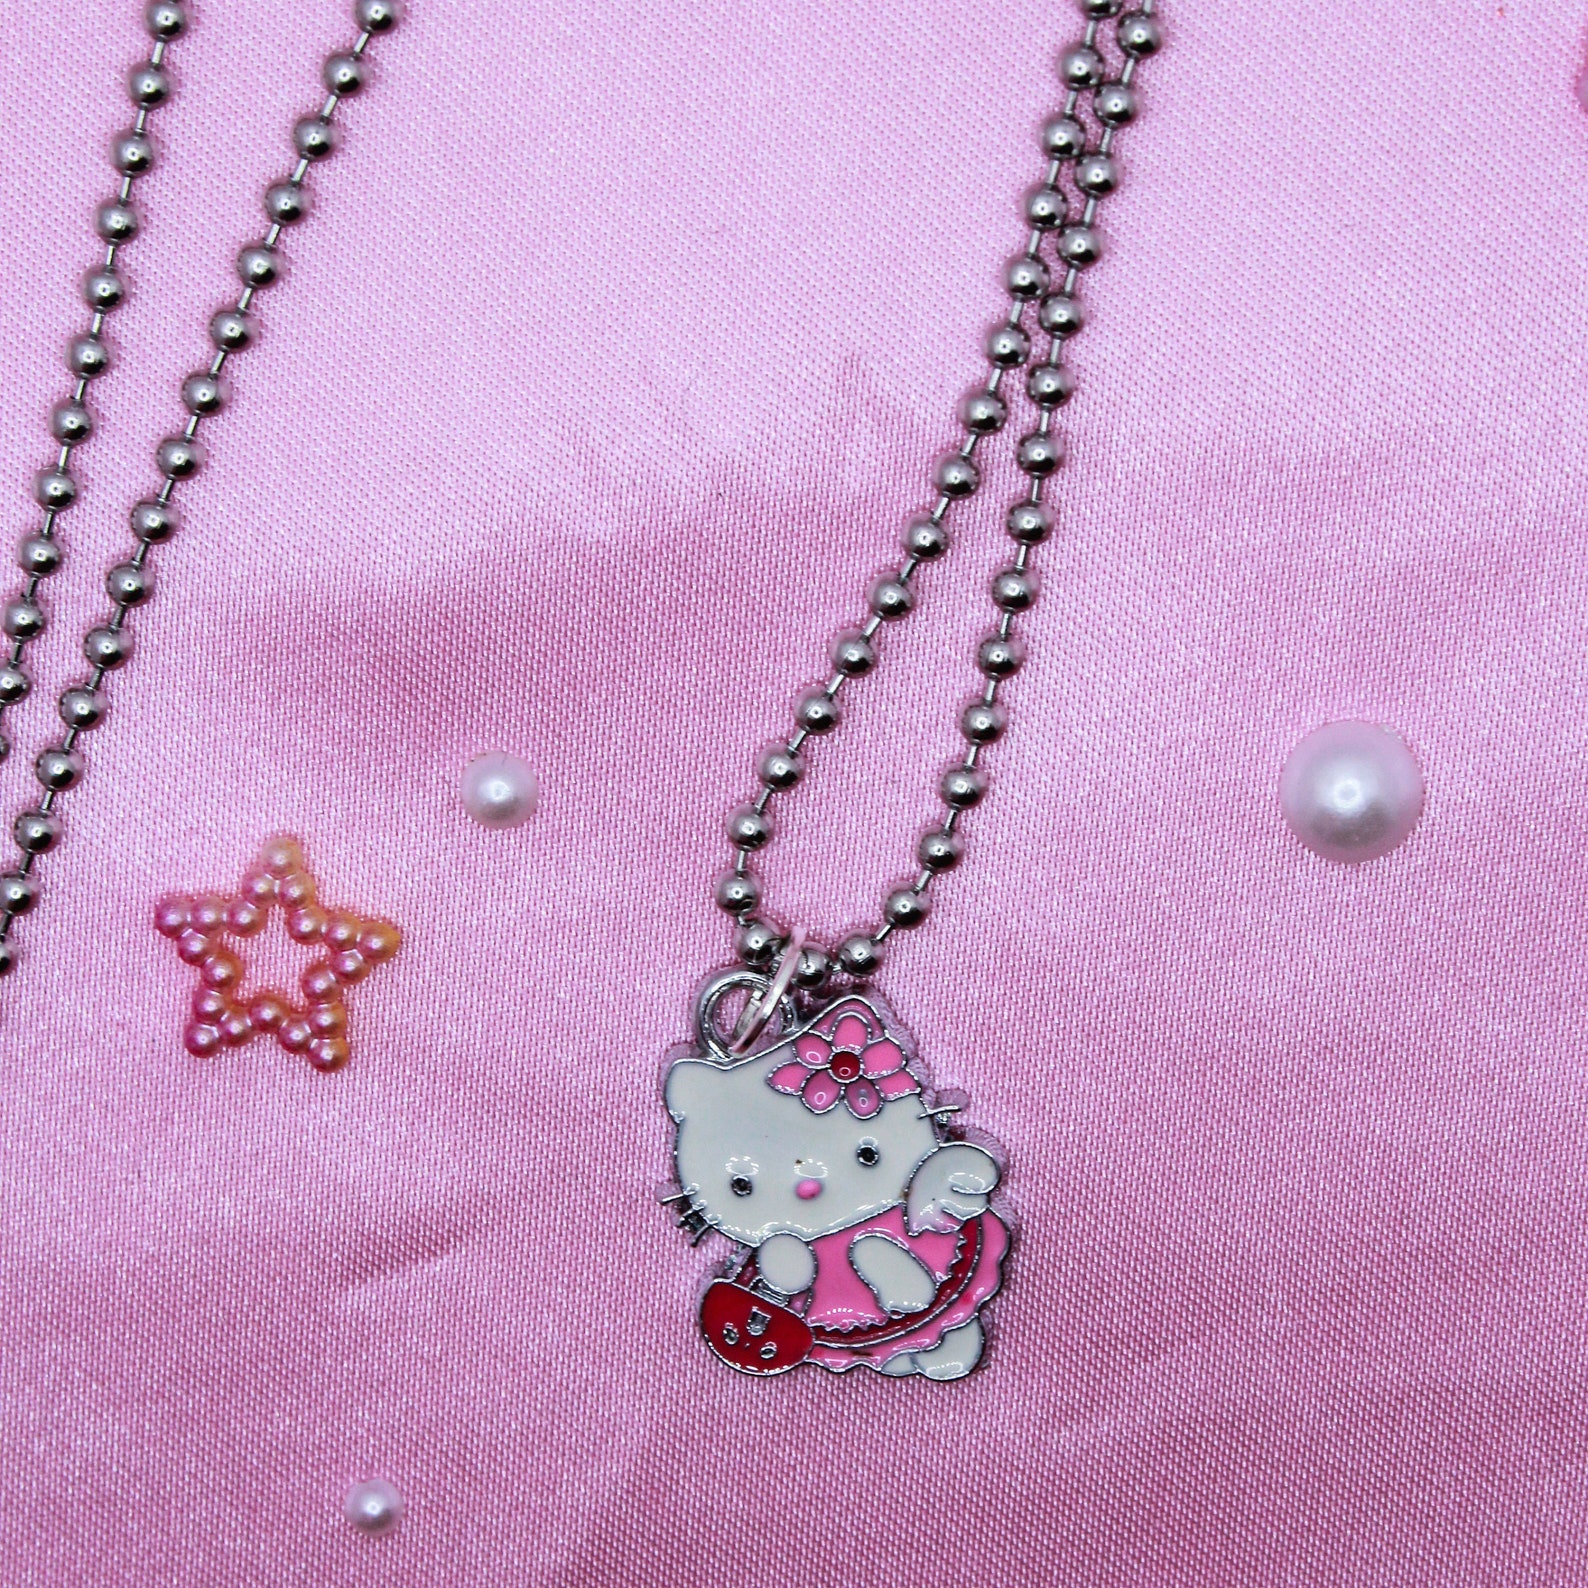 Super cute cartoon necklaces cute character necklaces kitty | Etsy